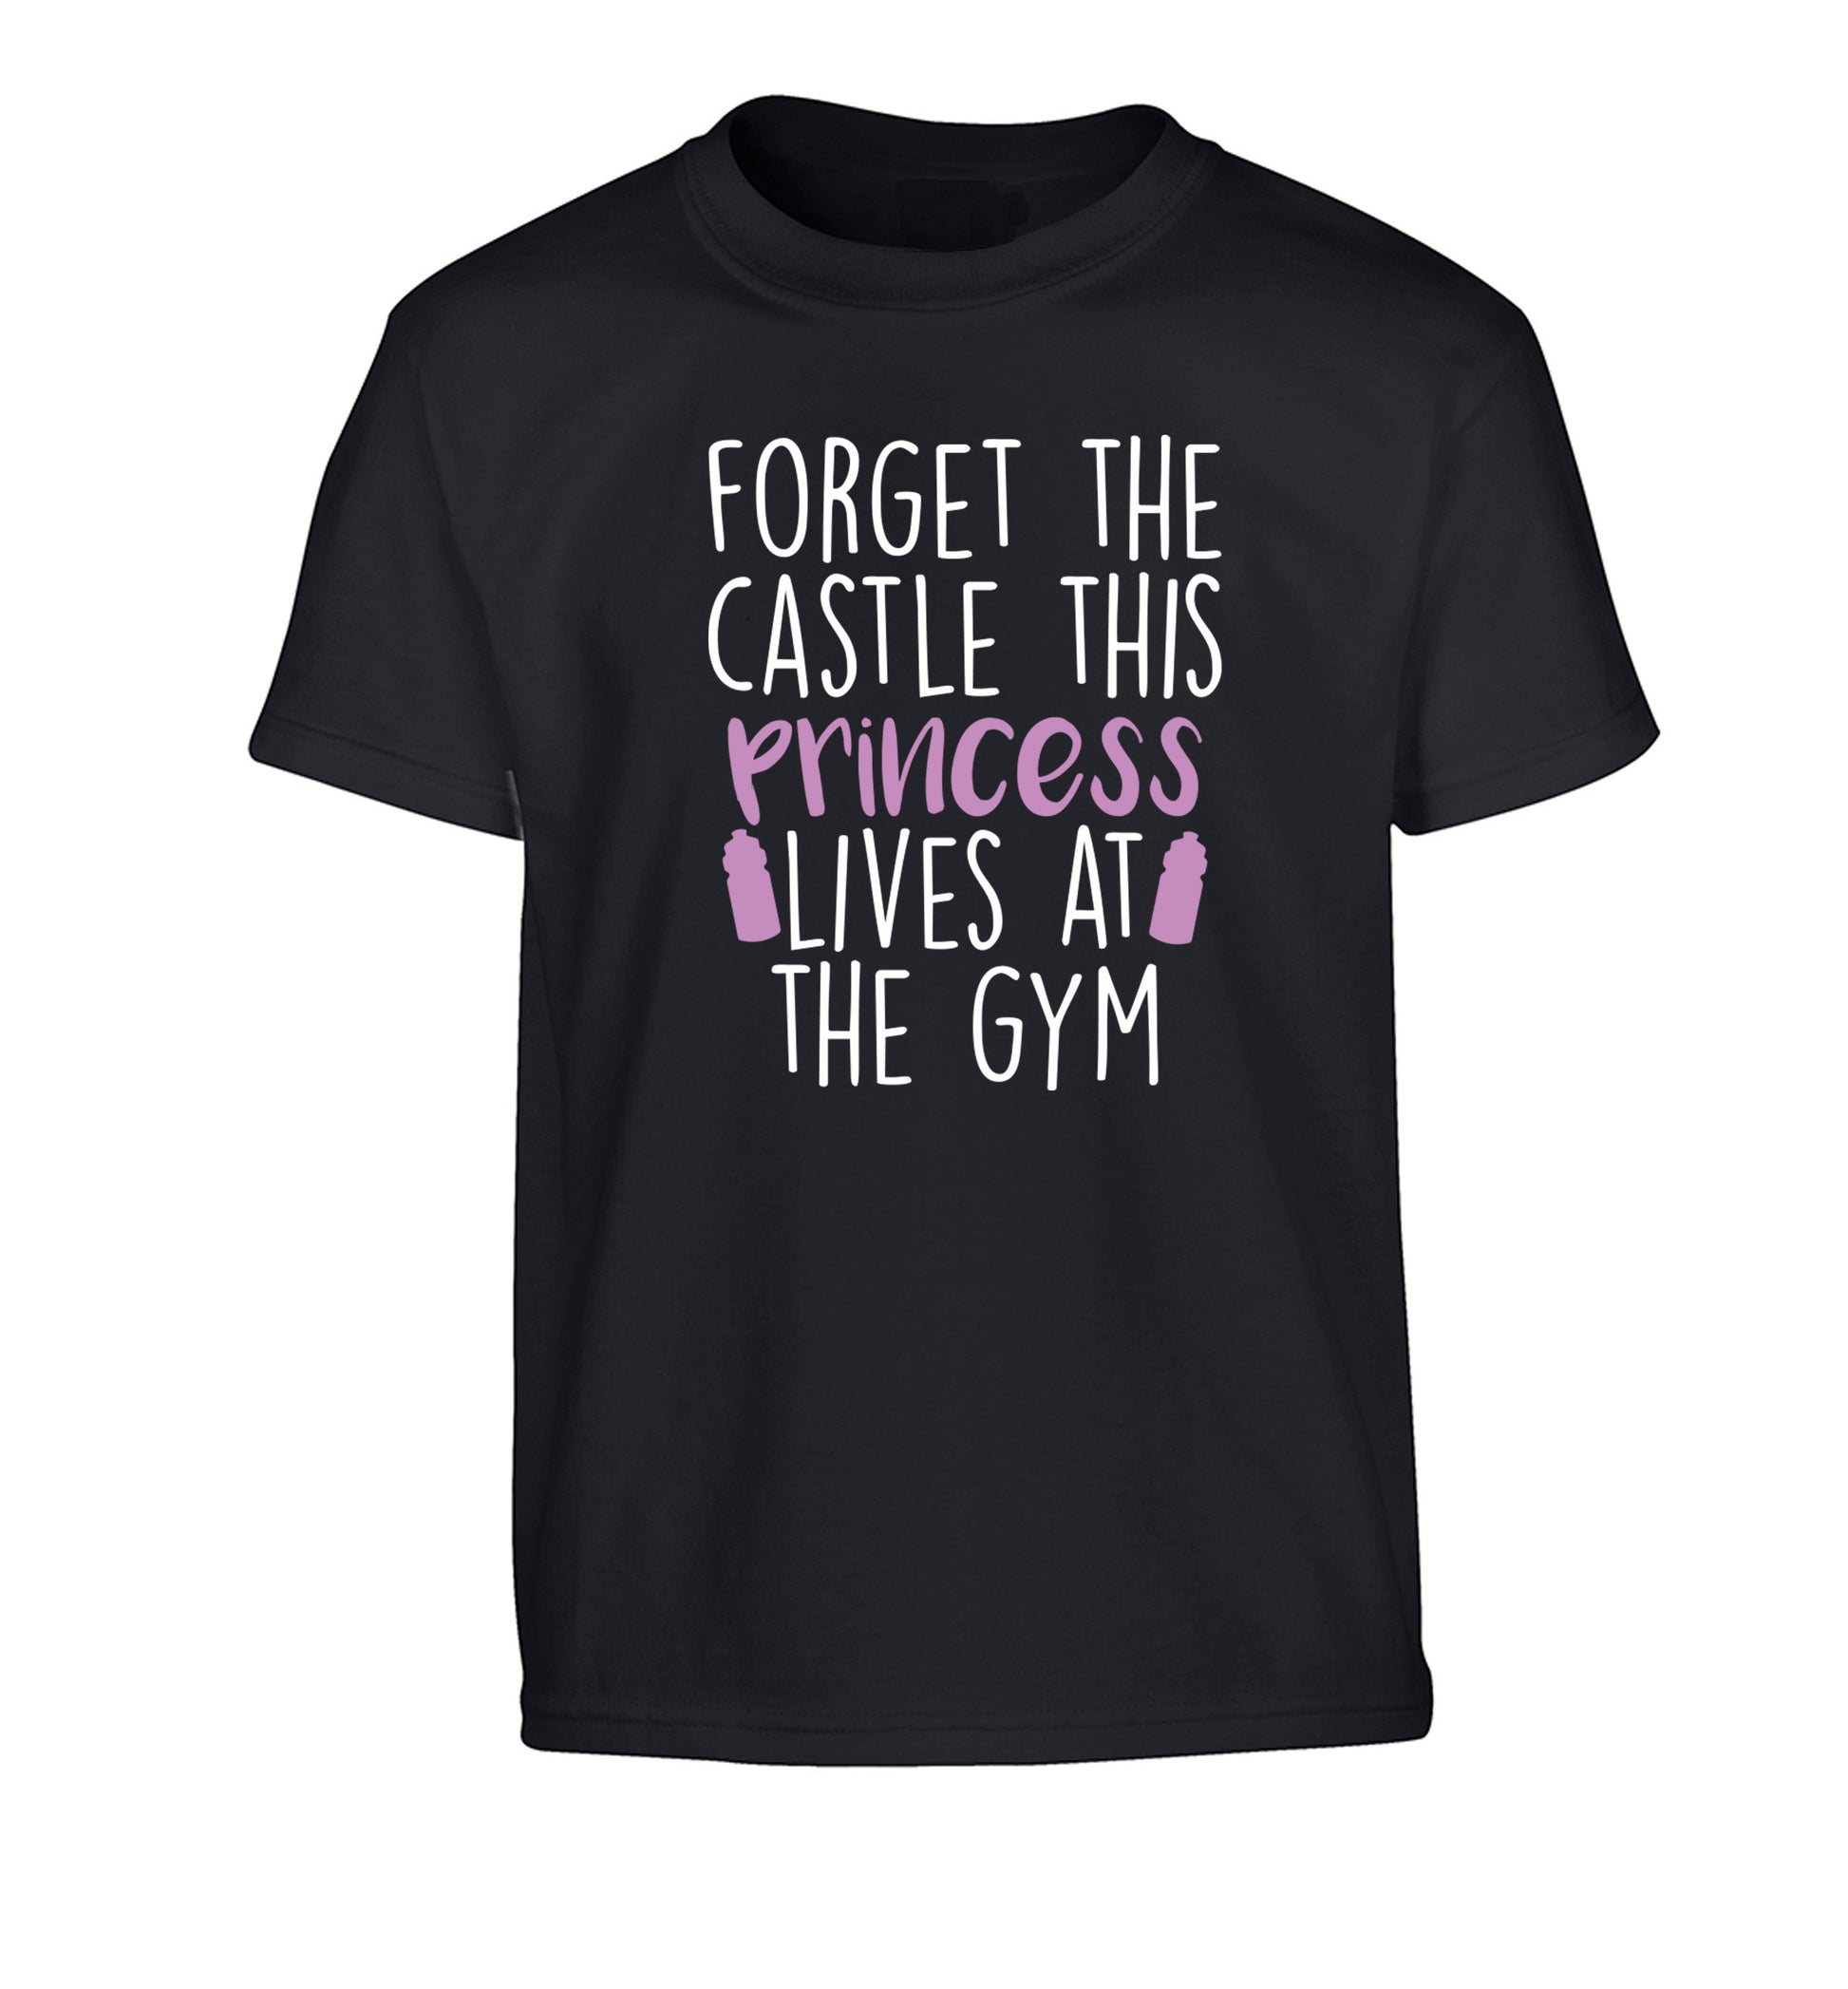 Forget the castle this princess lives at the gym Children's black Tshirt 12-14 Years